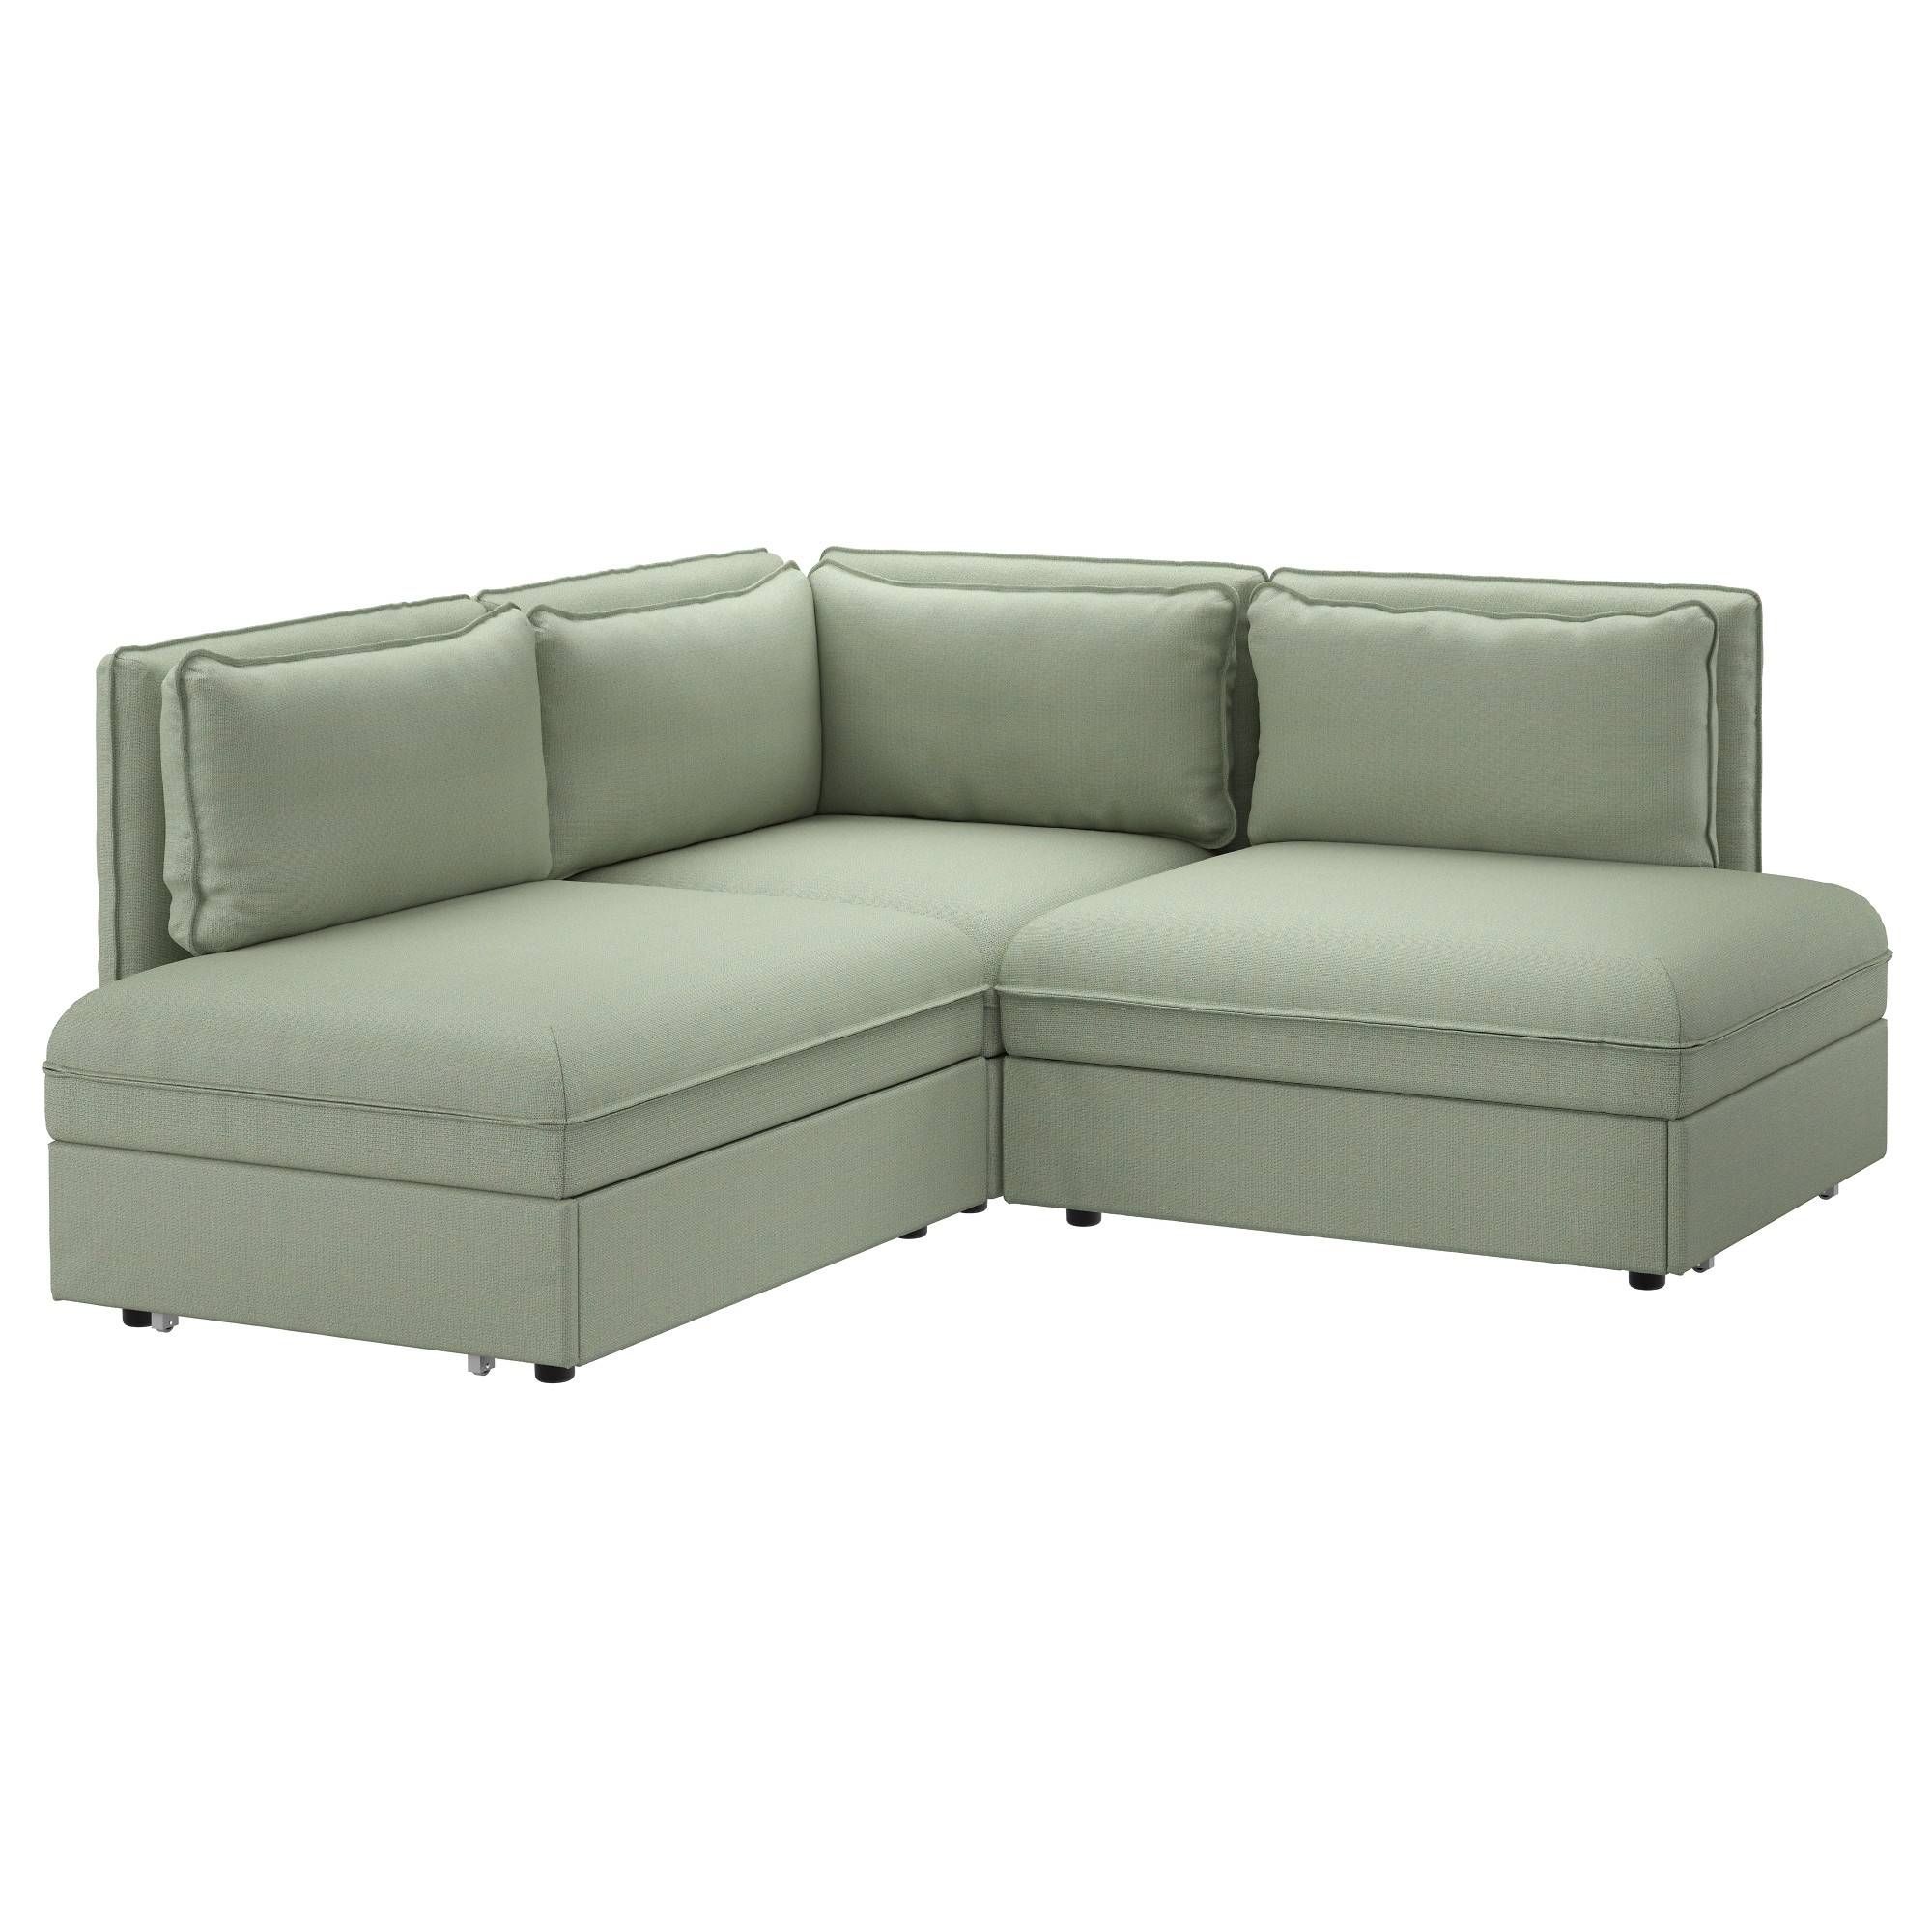 Vallentuna Sleeper Sectional, 2 Seat – Orrsta Beige/hillared Green Pertaining To 2 Seat Sectional Sofas (Photo 24 of 30)